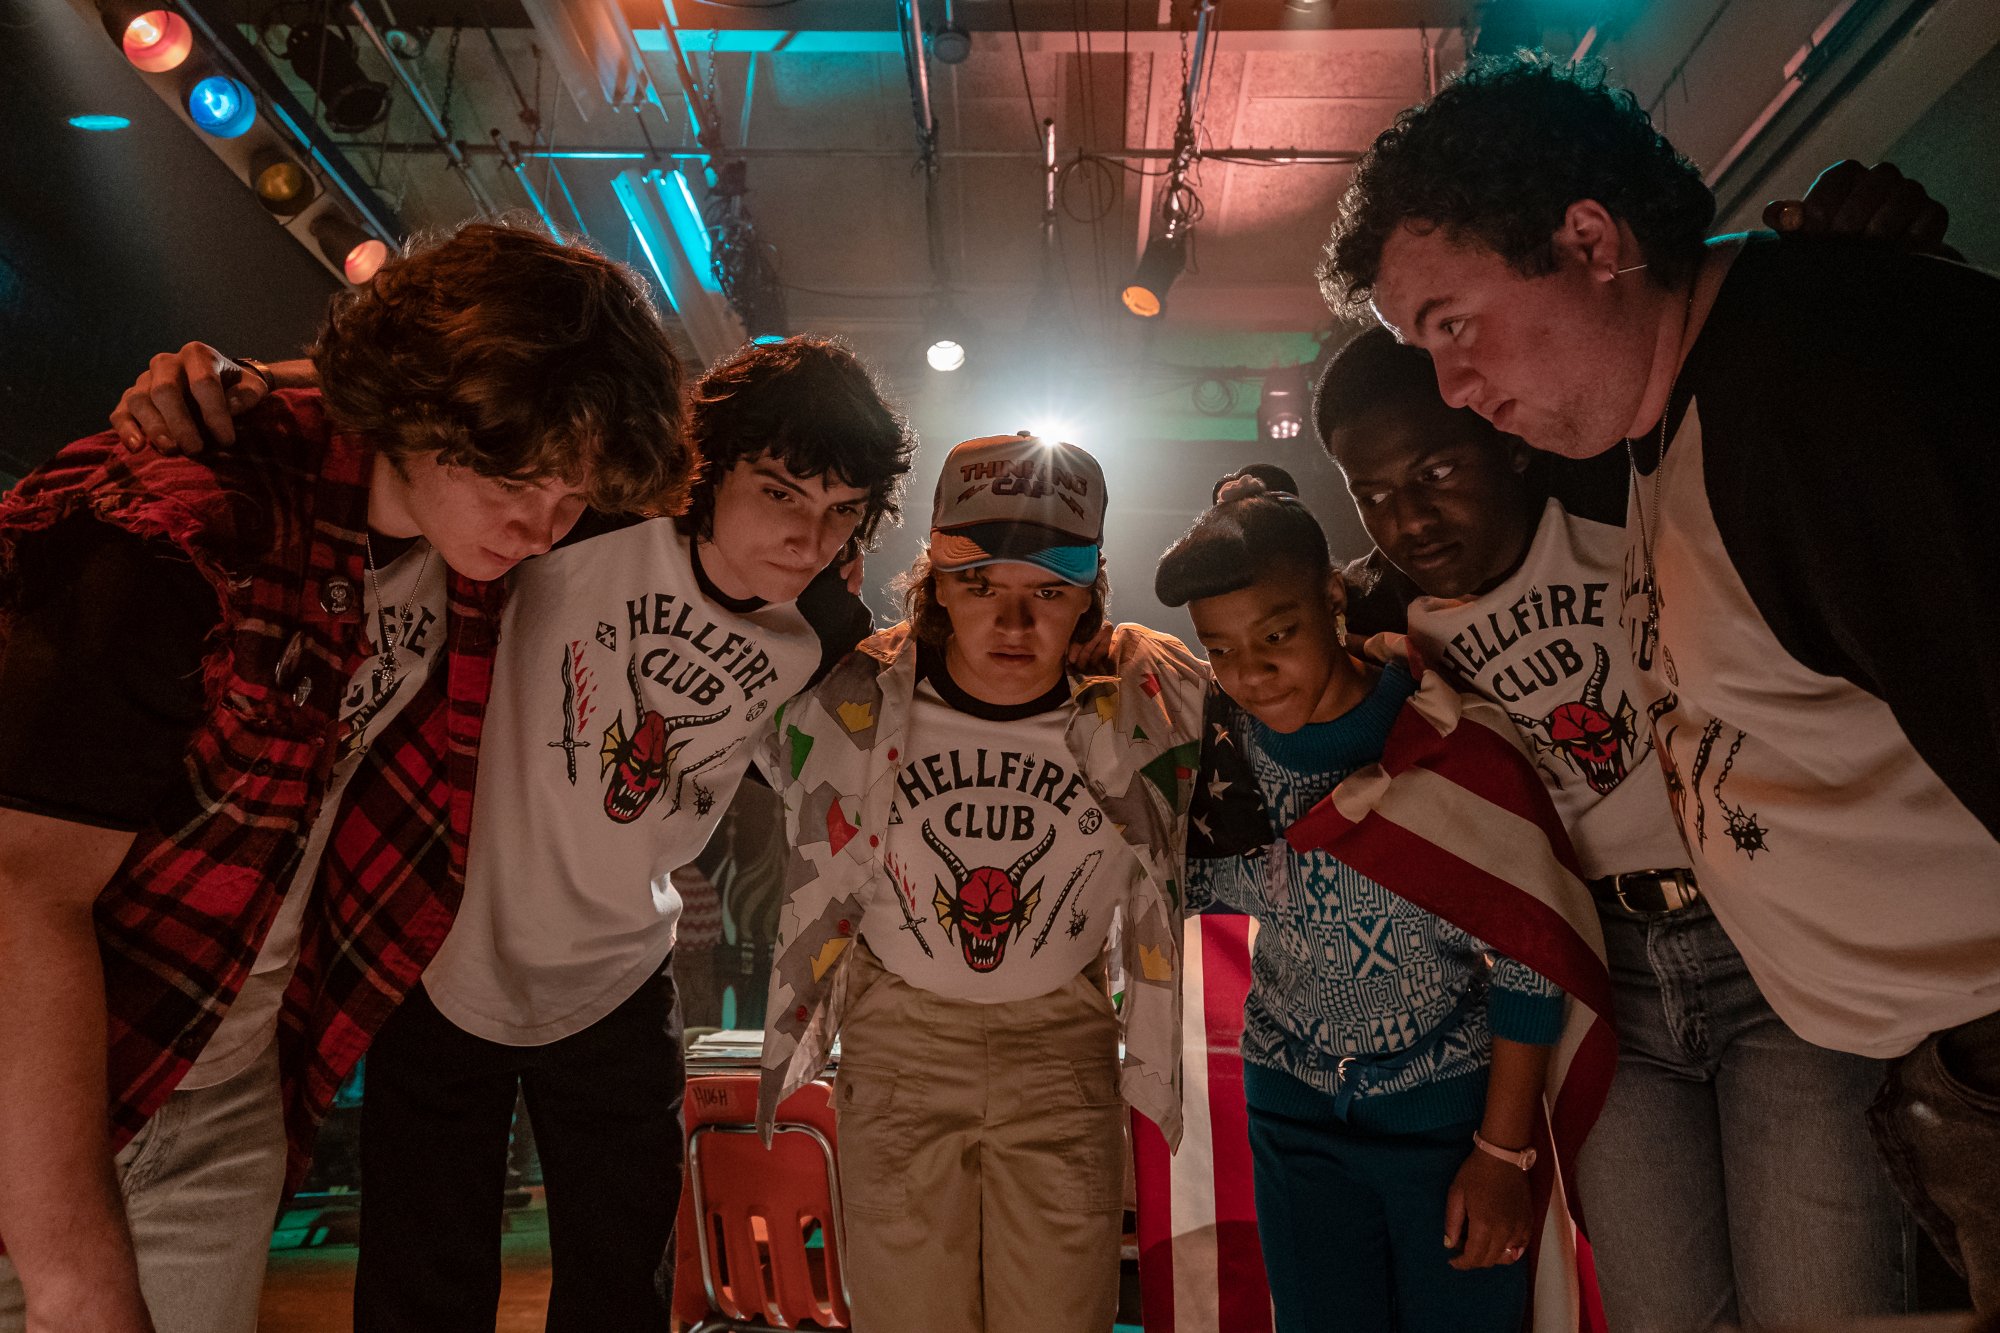 Finn Wolfhard as Mike Wheeler, Gaten Matarazzo as Dustin Hendrson and Priah Ferguson as Erica Sinclair in 'Stranger Things,' which has already received a season 5 renewal. The characters are huddled with several older boys from the Hellfire Club.